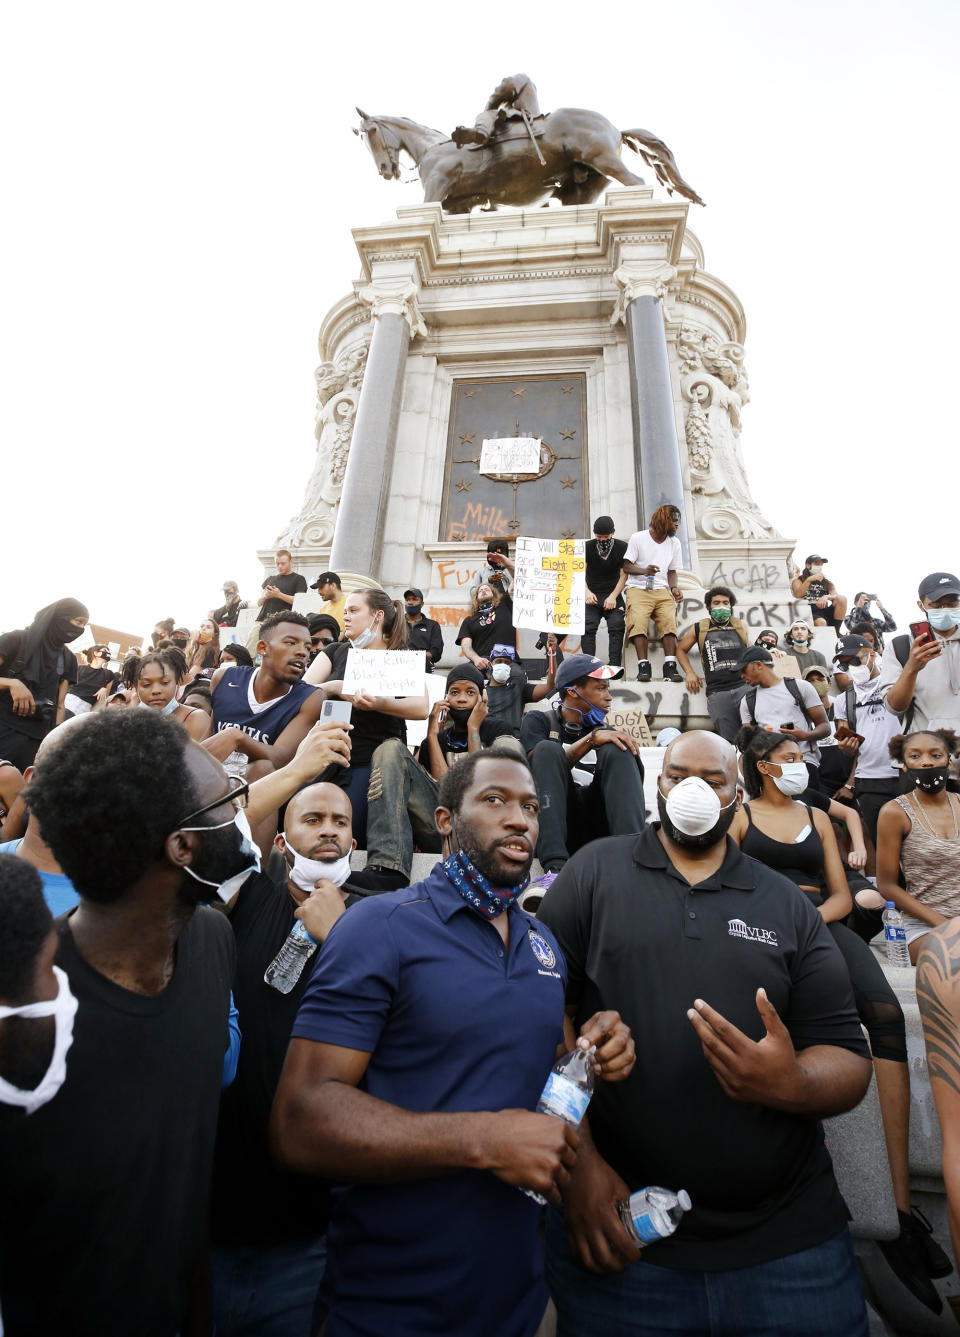 Mayor Stoney with demonstrators at the base of the Richmond monument to Robert E. Lee on June 2.